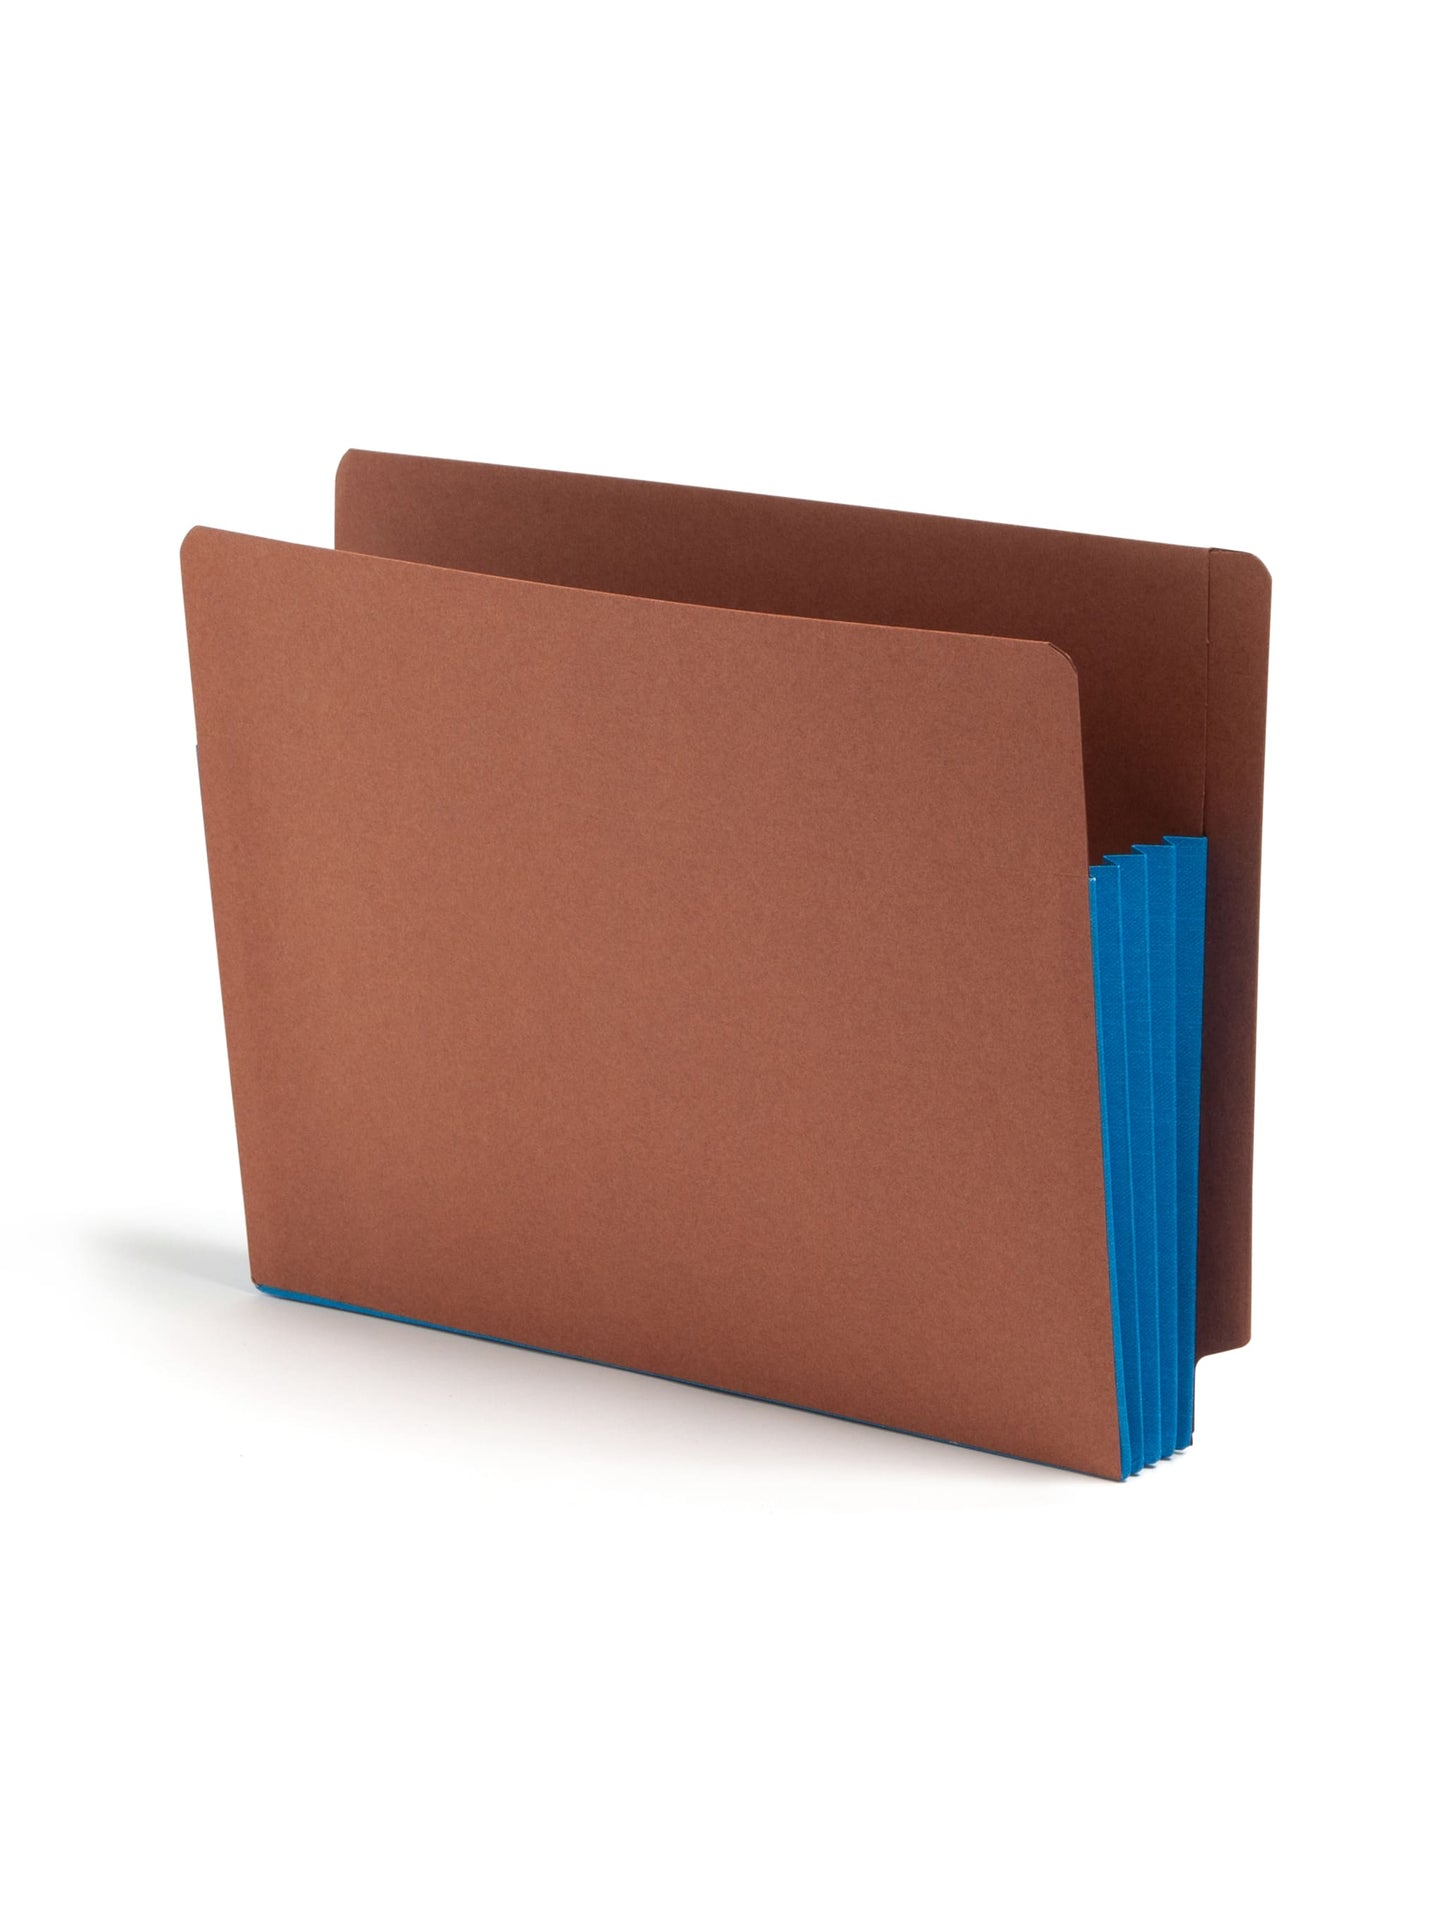 Reinforced End Tab File Pockets, Straight-Cut Tab, 3-1/2 inch Expansion, Blue Color, Extra Wide Letter Size, Set of 0, 30086486736795